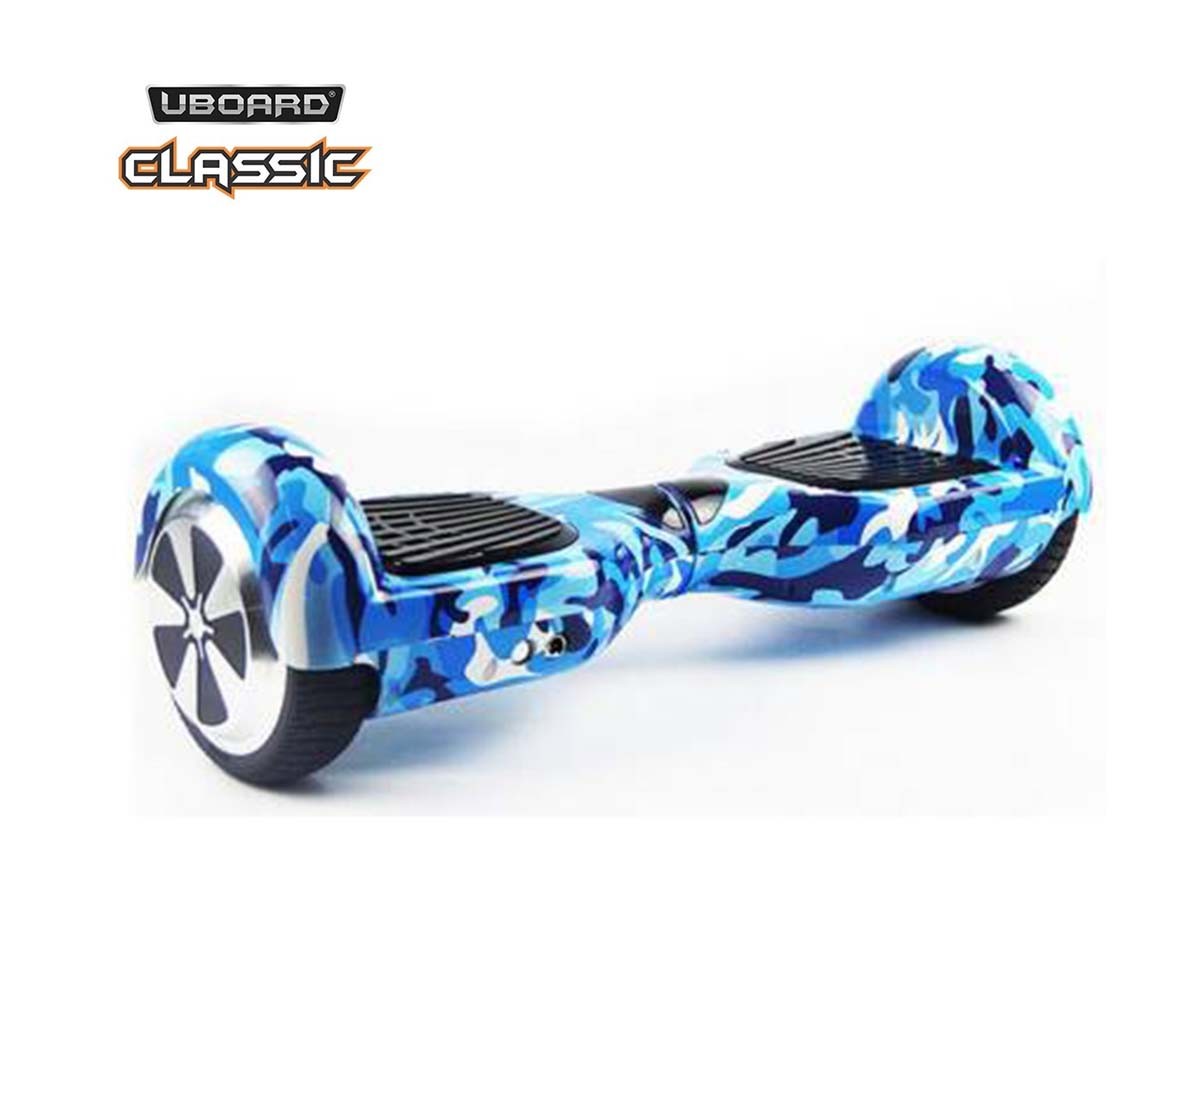 Uboard Hoverboard Classic 6.5 Lite EV Novelty Rideons for Kids, 14Y+ 